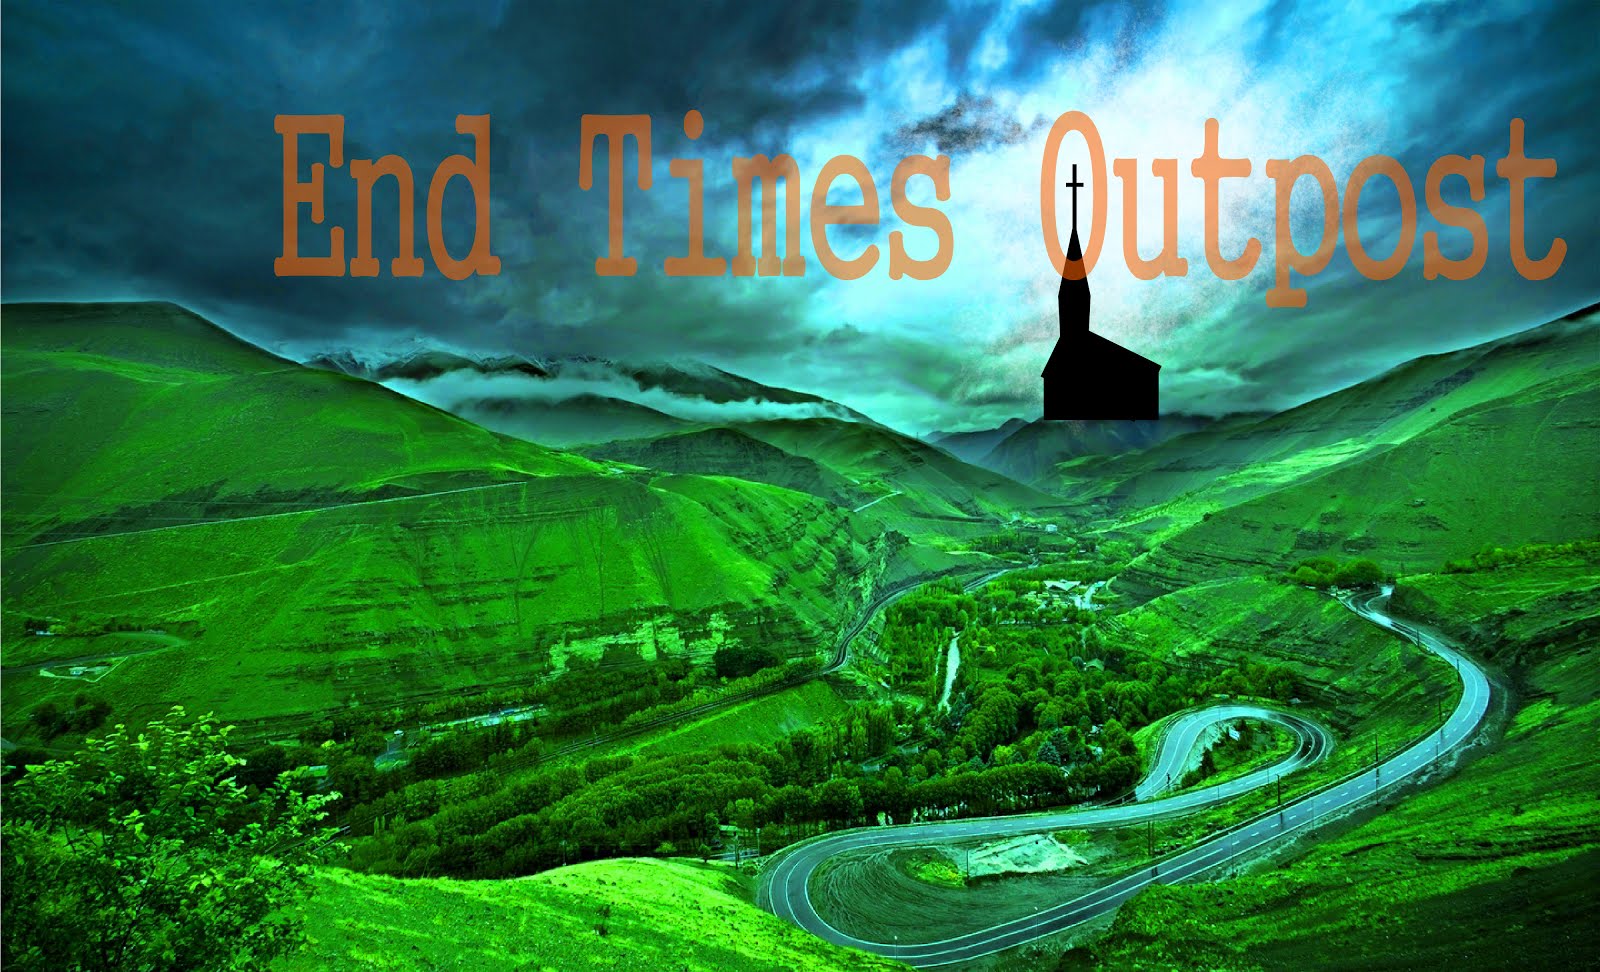 End Times Outpost